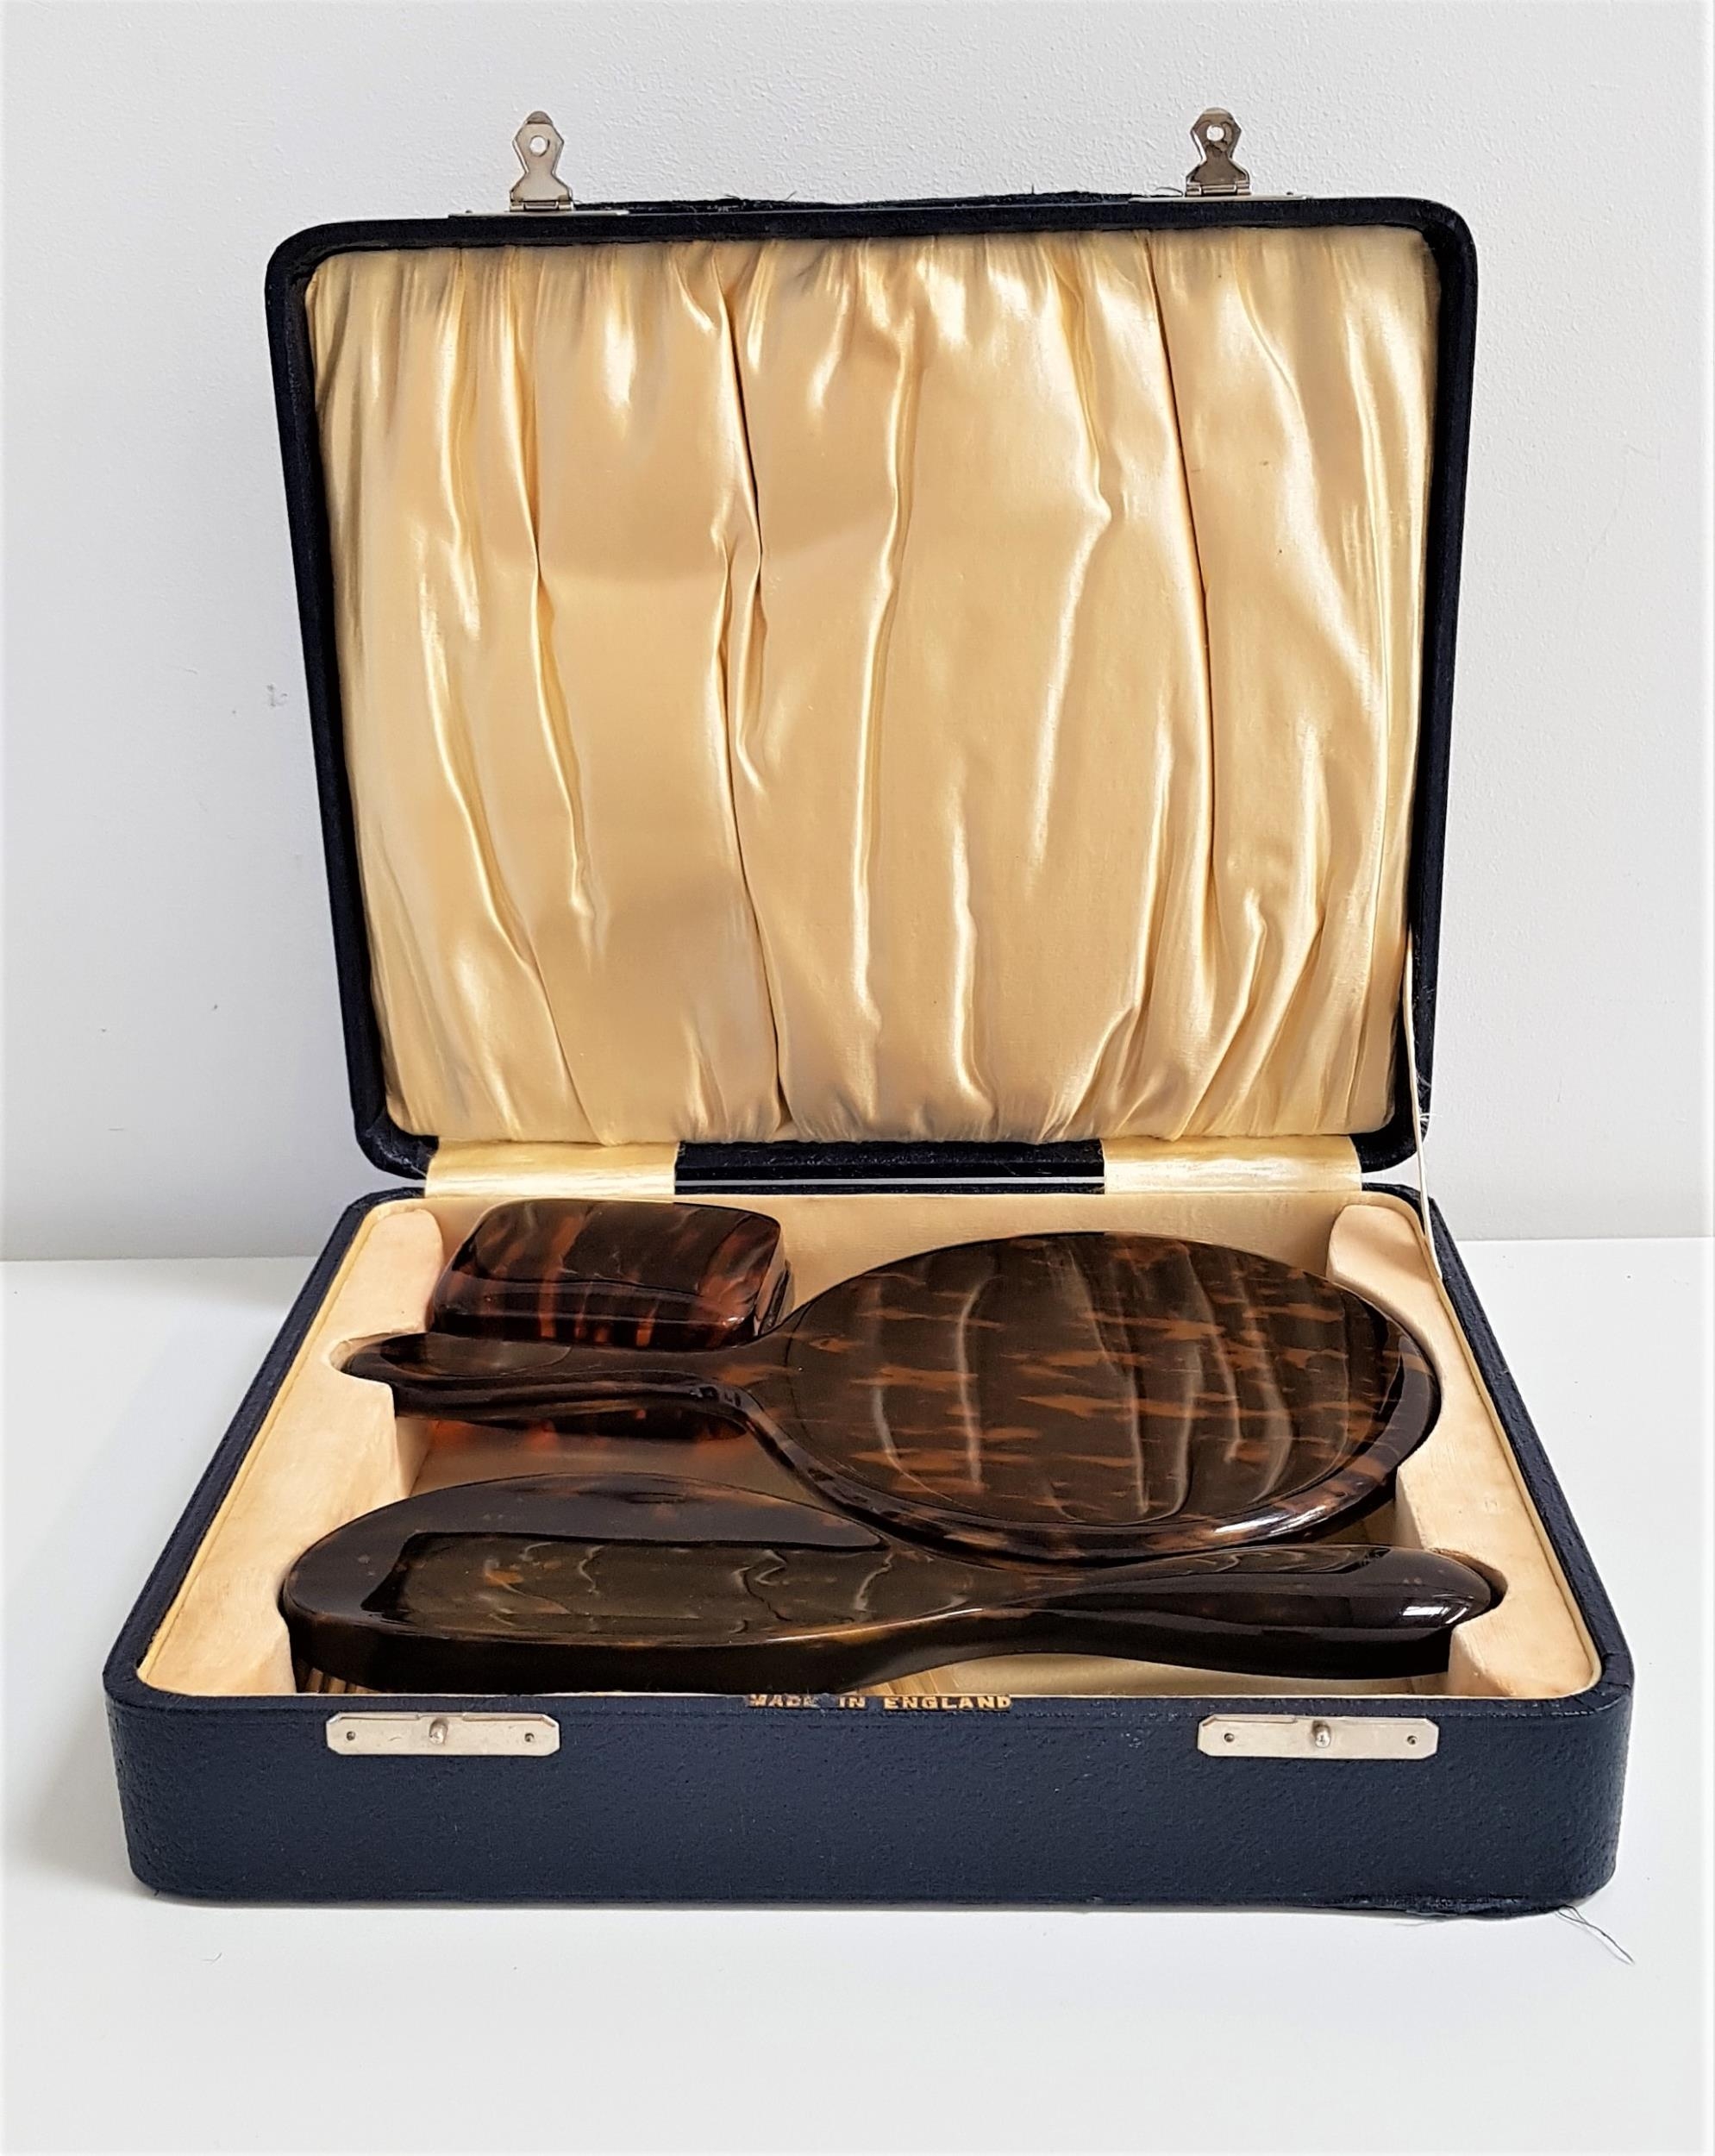 FAUX TORTOISESHELL DRESSING TABLE SET in a fitted box, comprising a hair brush, hand mirror and soap